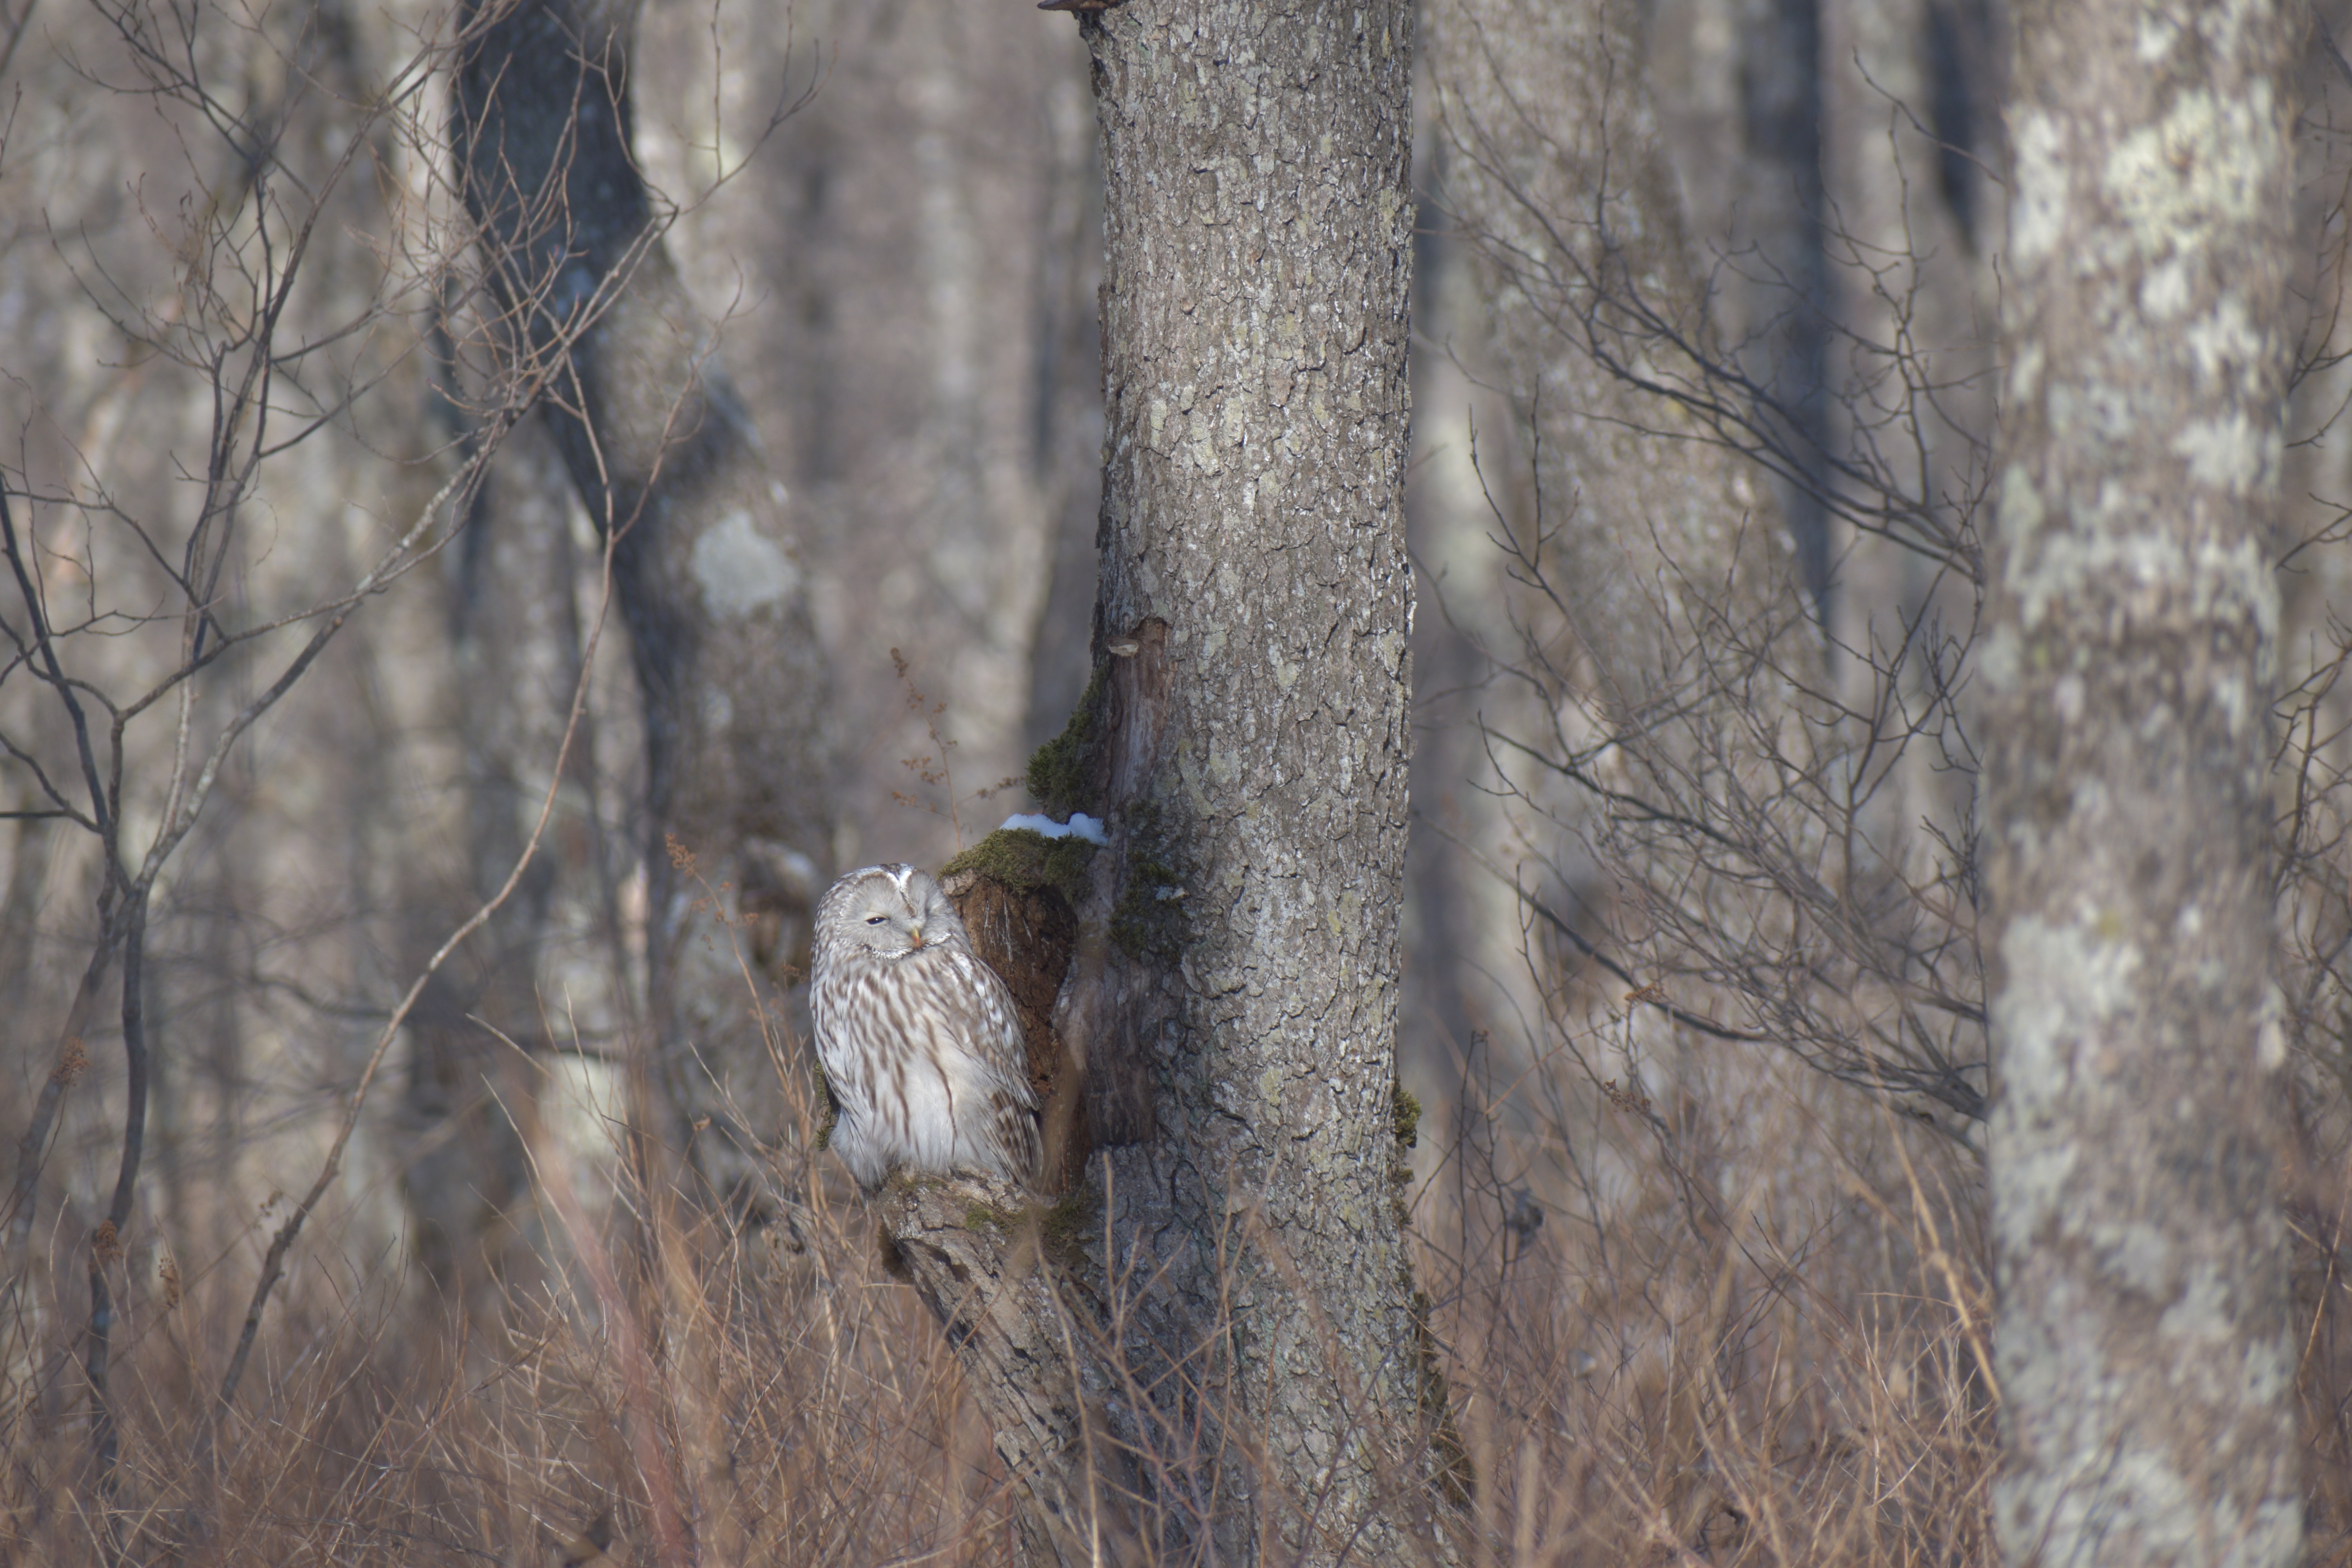 A Ural Owl wakes from its slumber in a tree hollow to take a look at its surroundings.